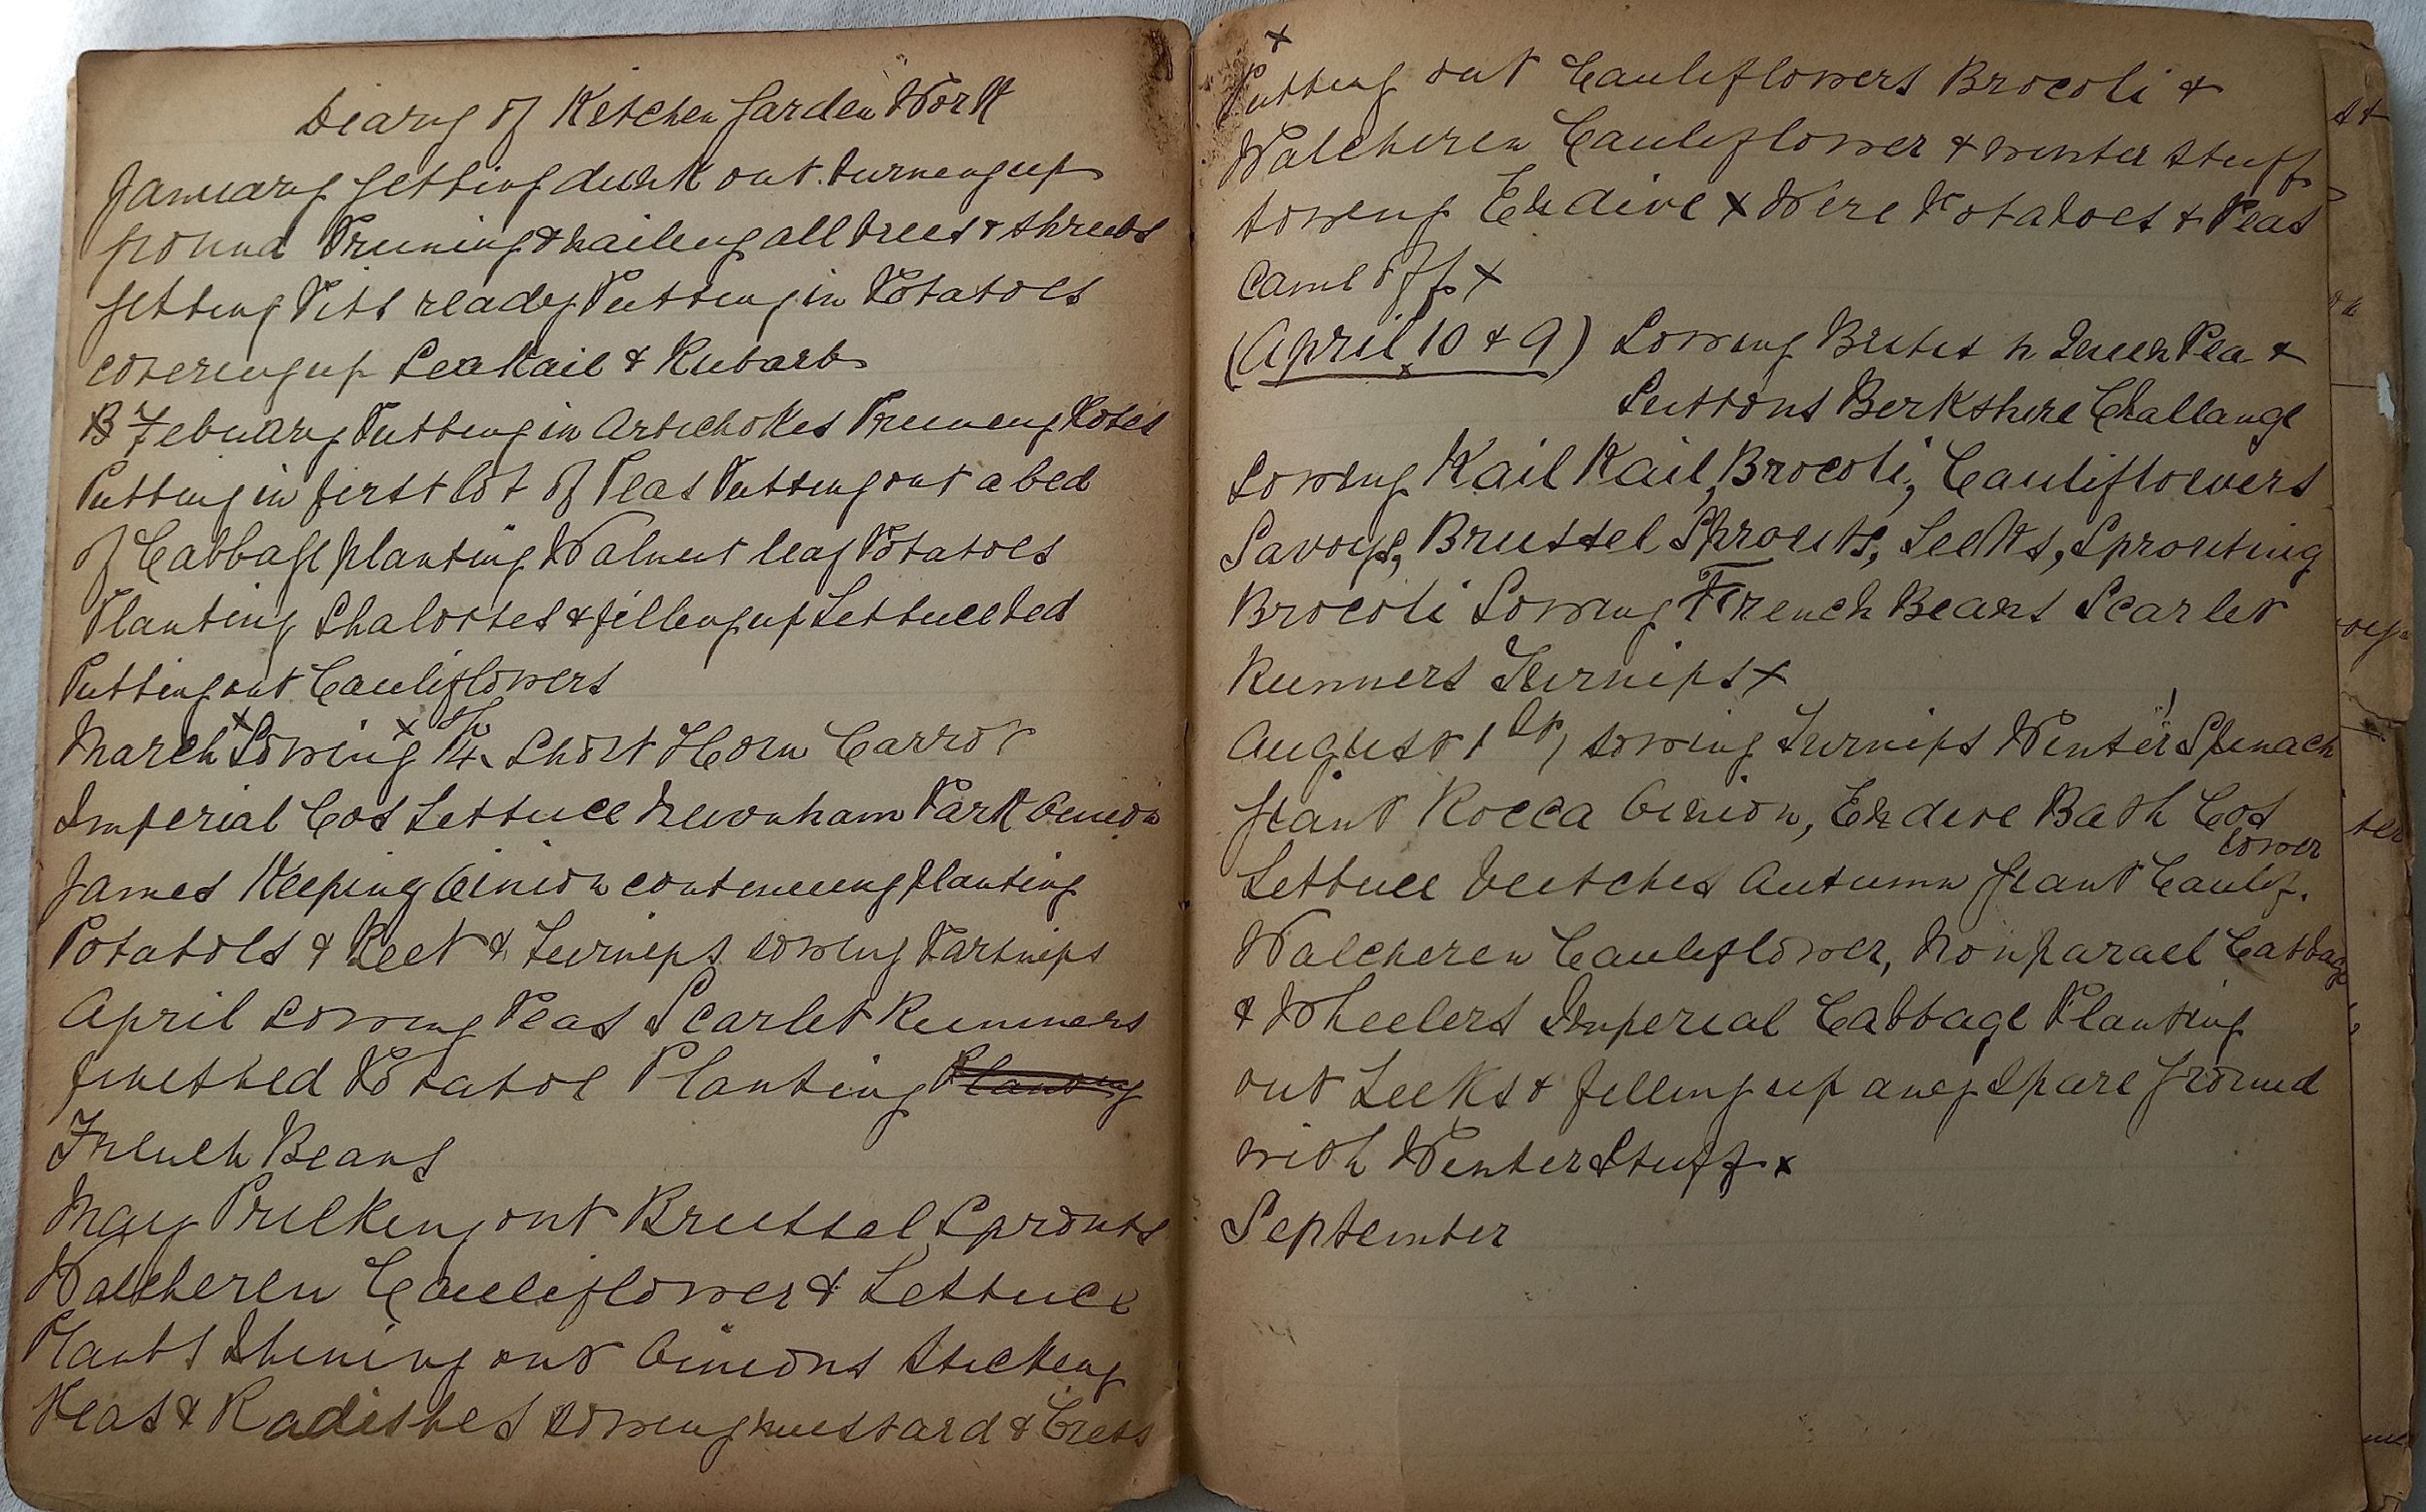 A handwritten diary entry across two pages of a book with brownish pages